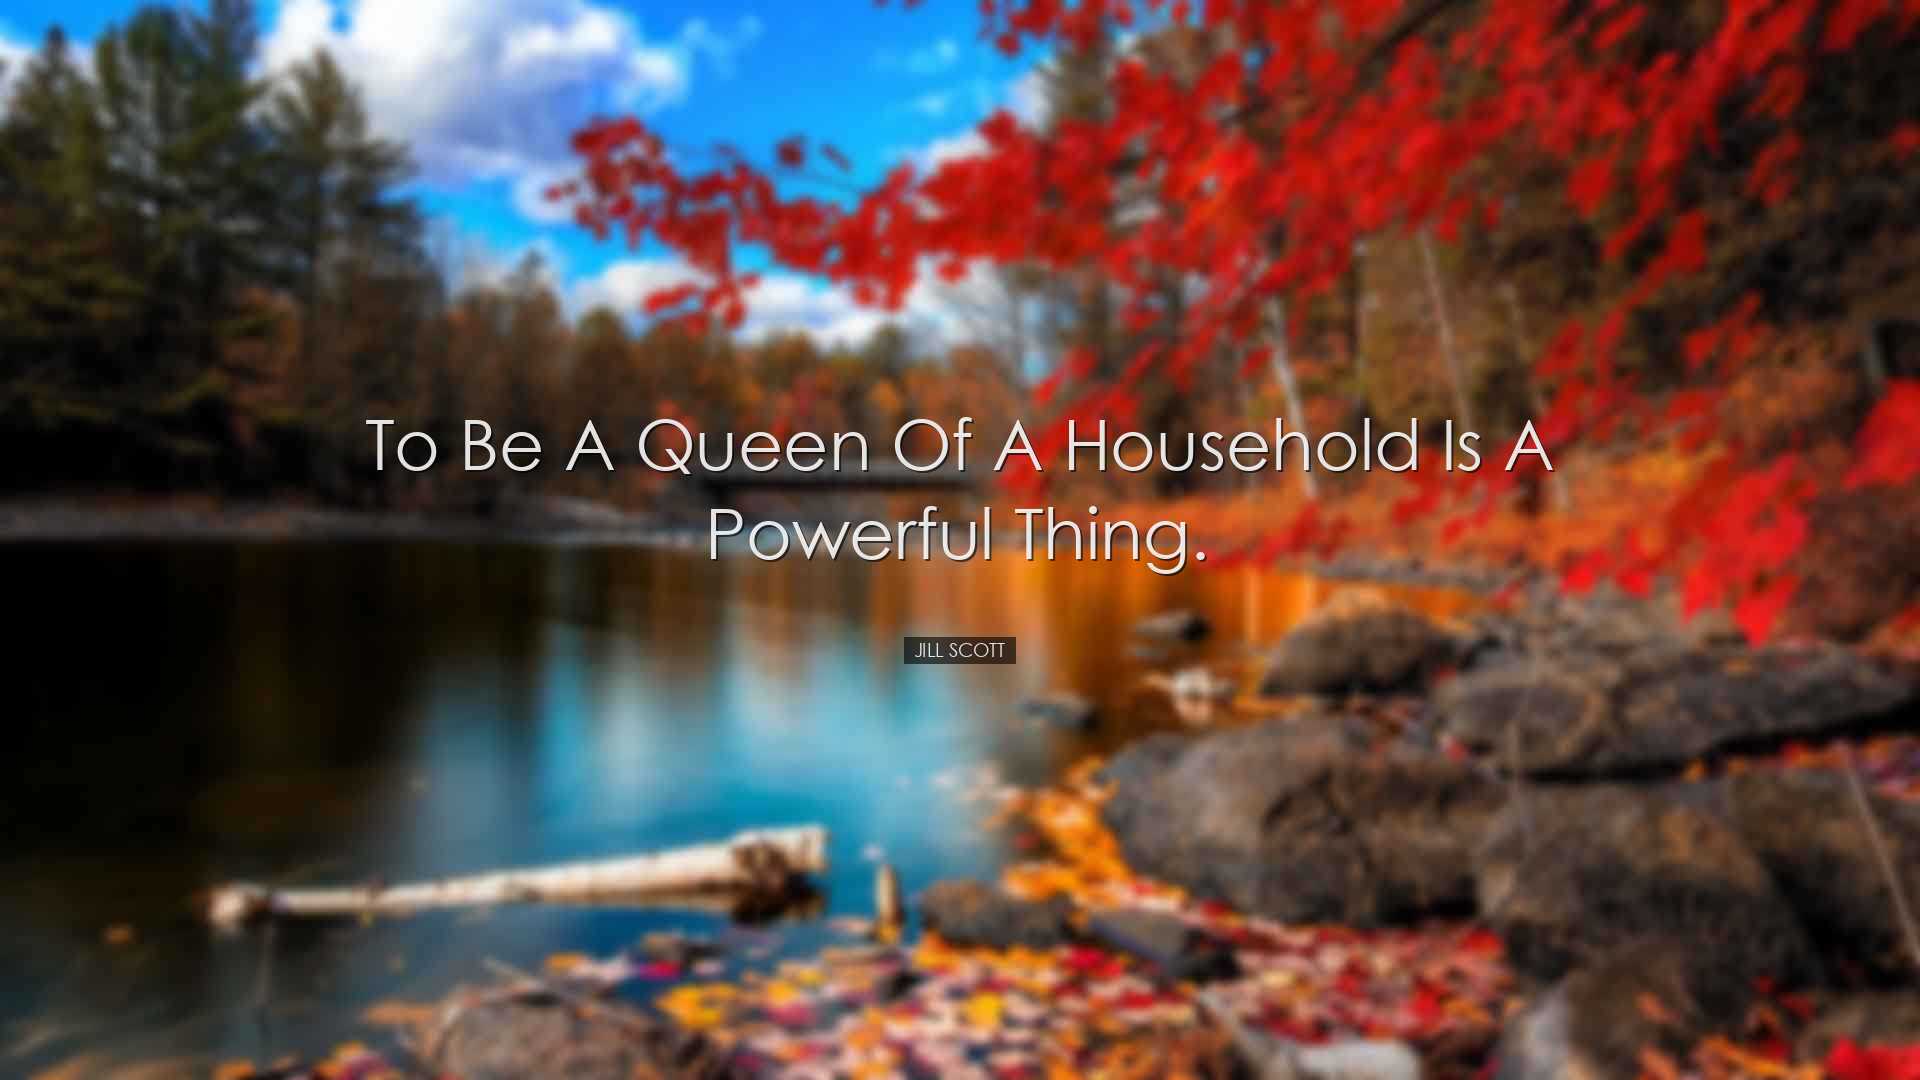 To be a queen of a household is a powerful thing. - Jill Scott